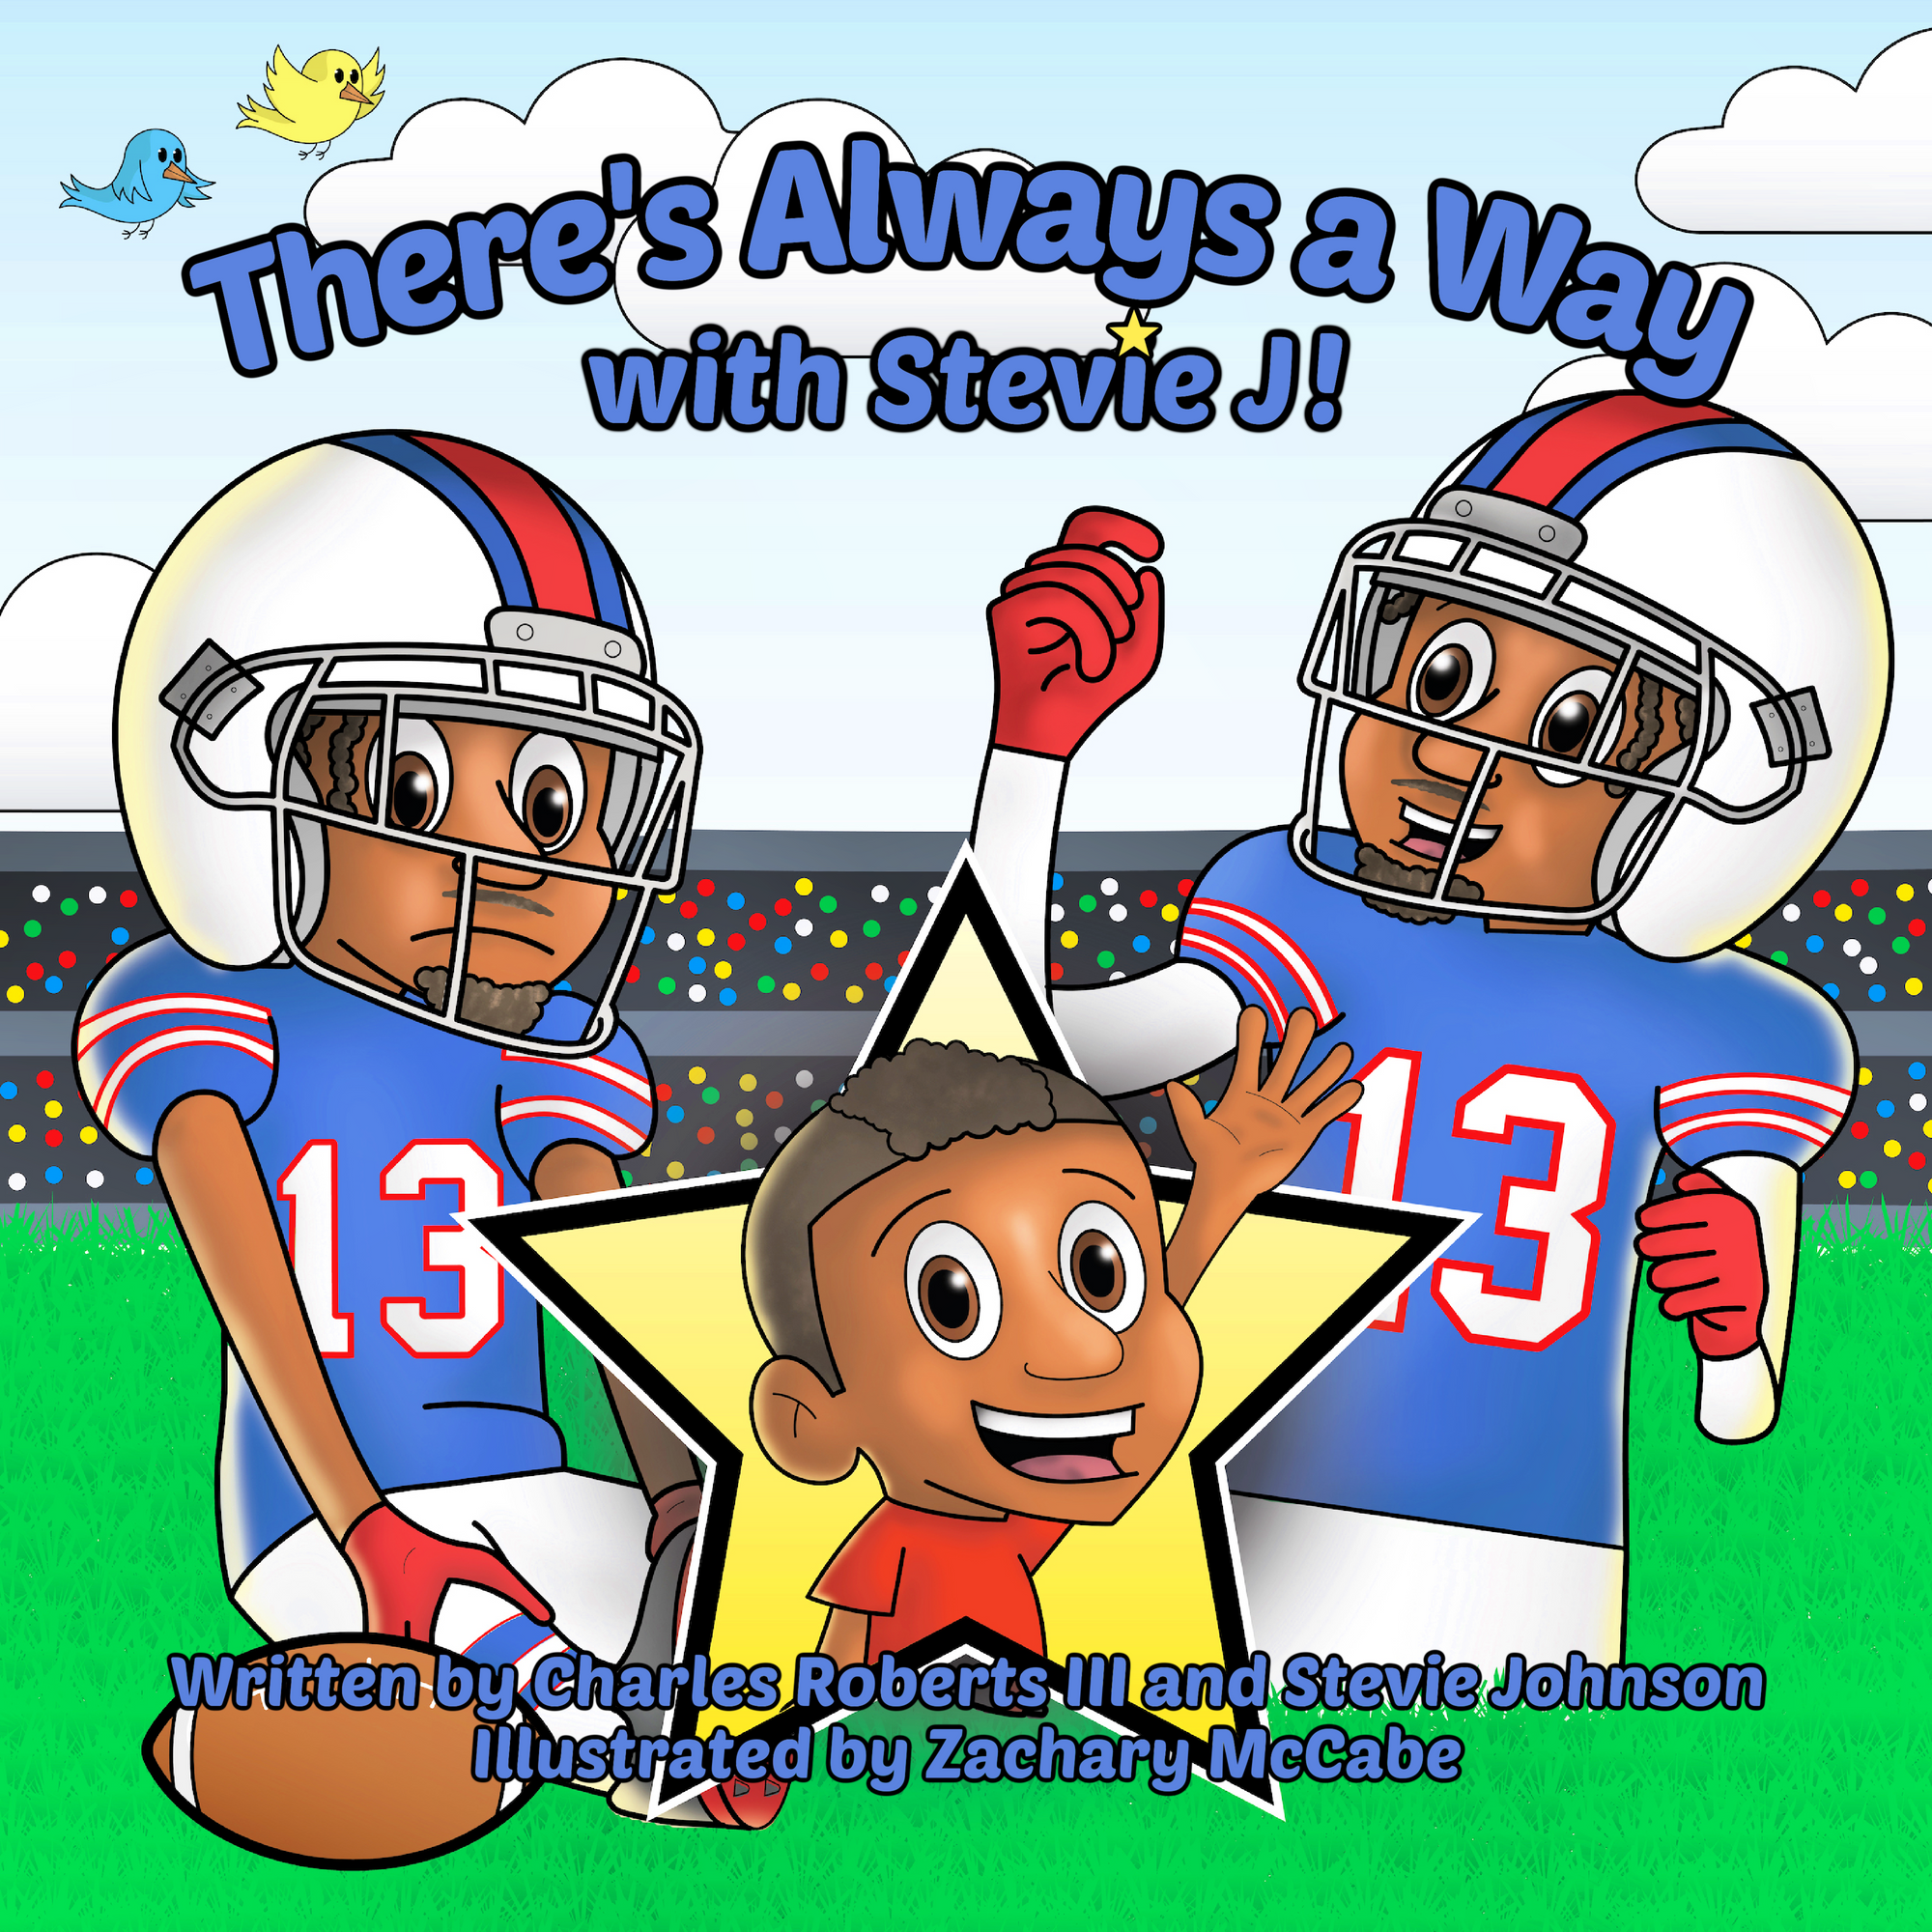 There's Always a Way with Stevie J